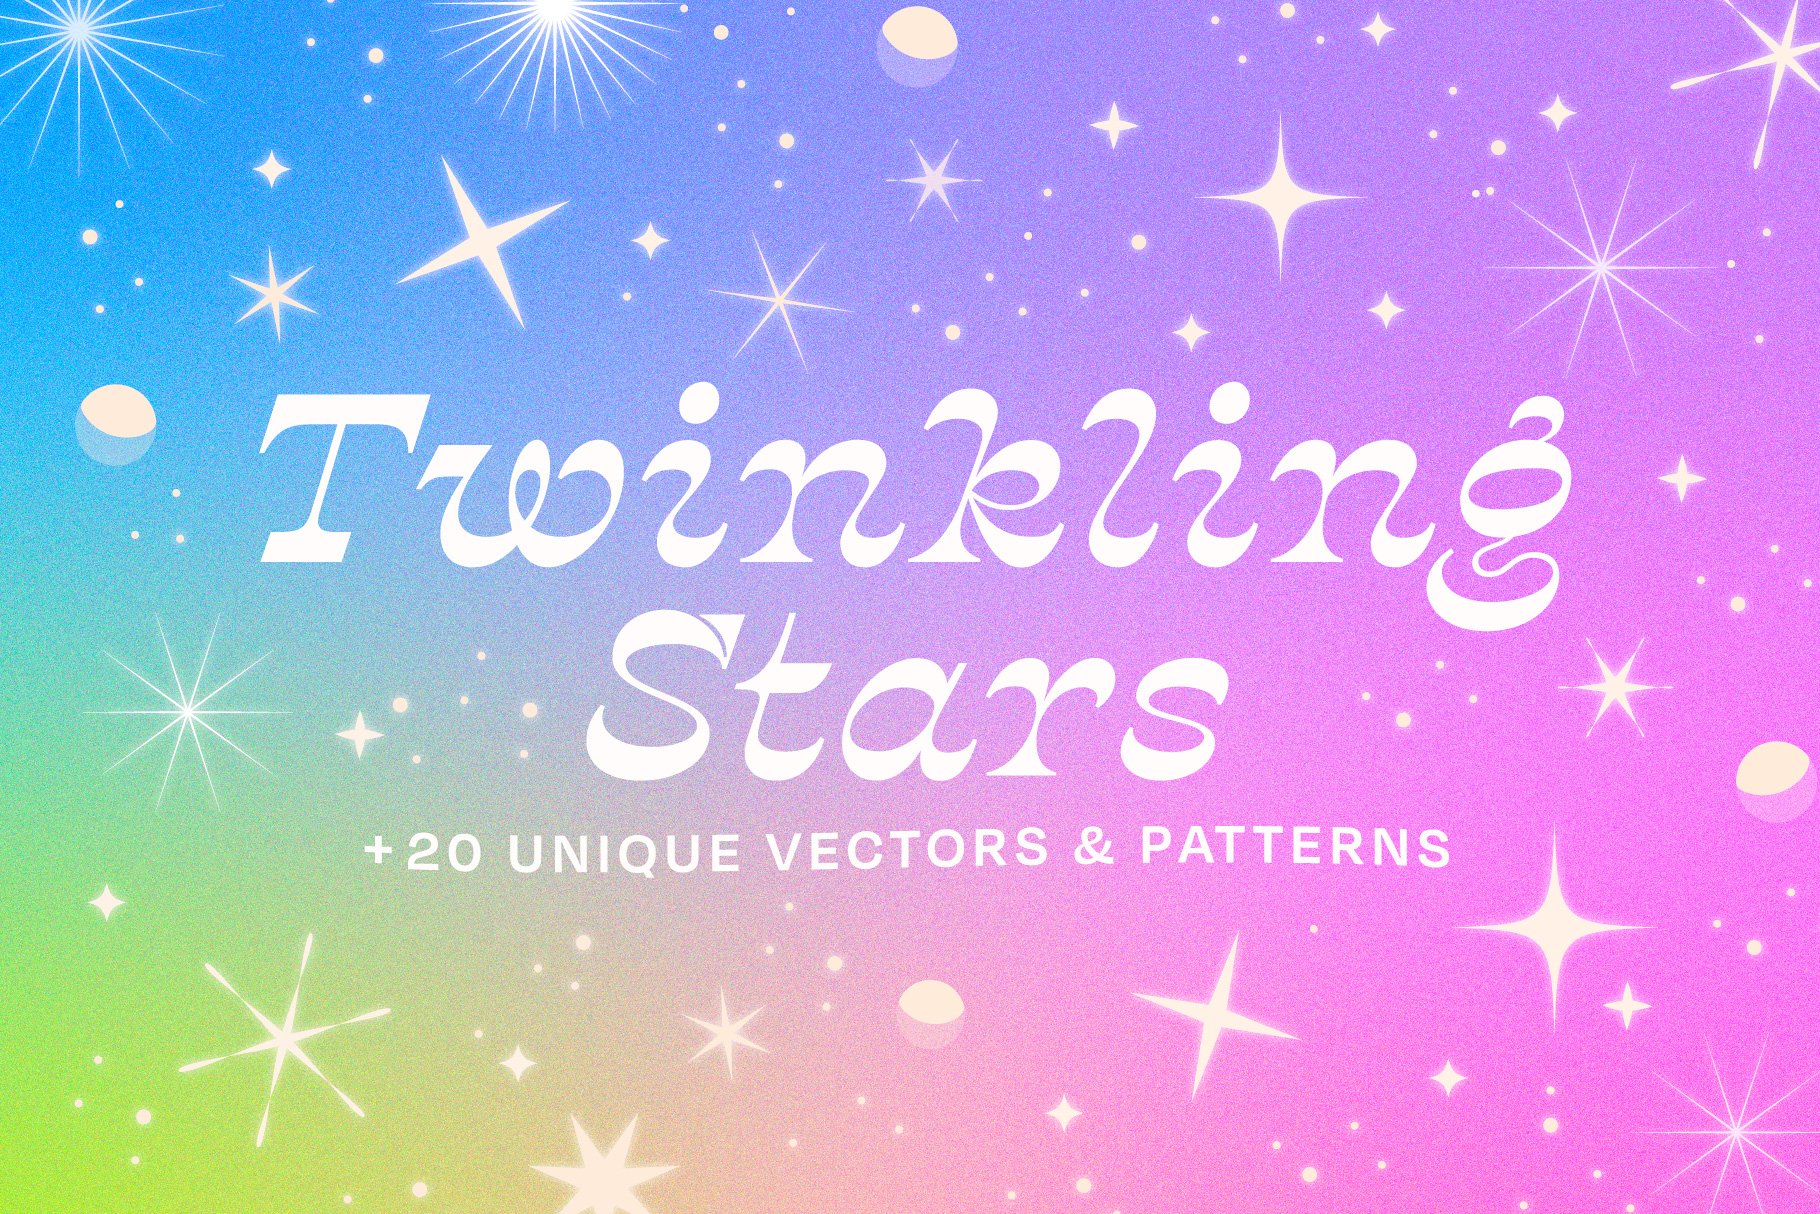 Twinkling Star Vector Pack cover image.